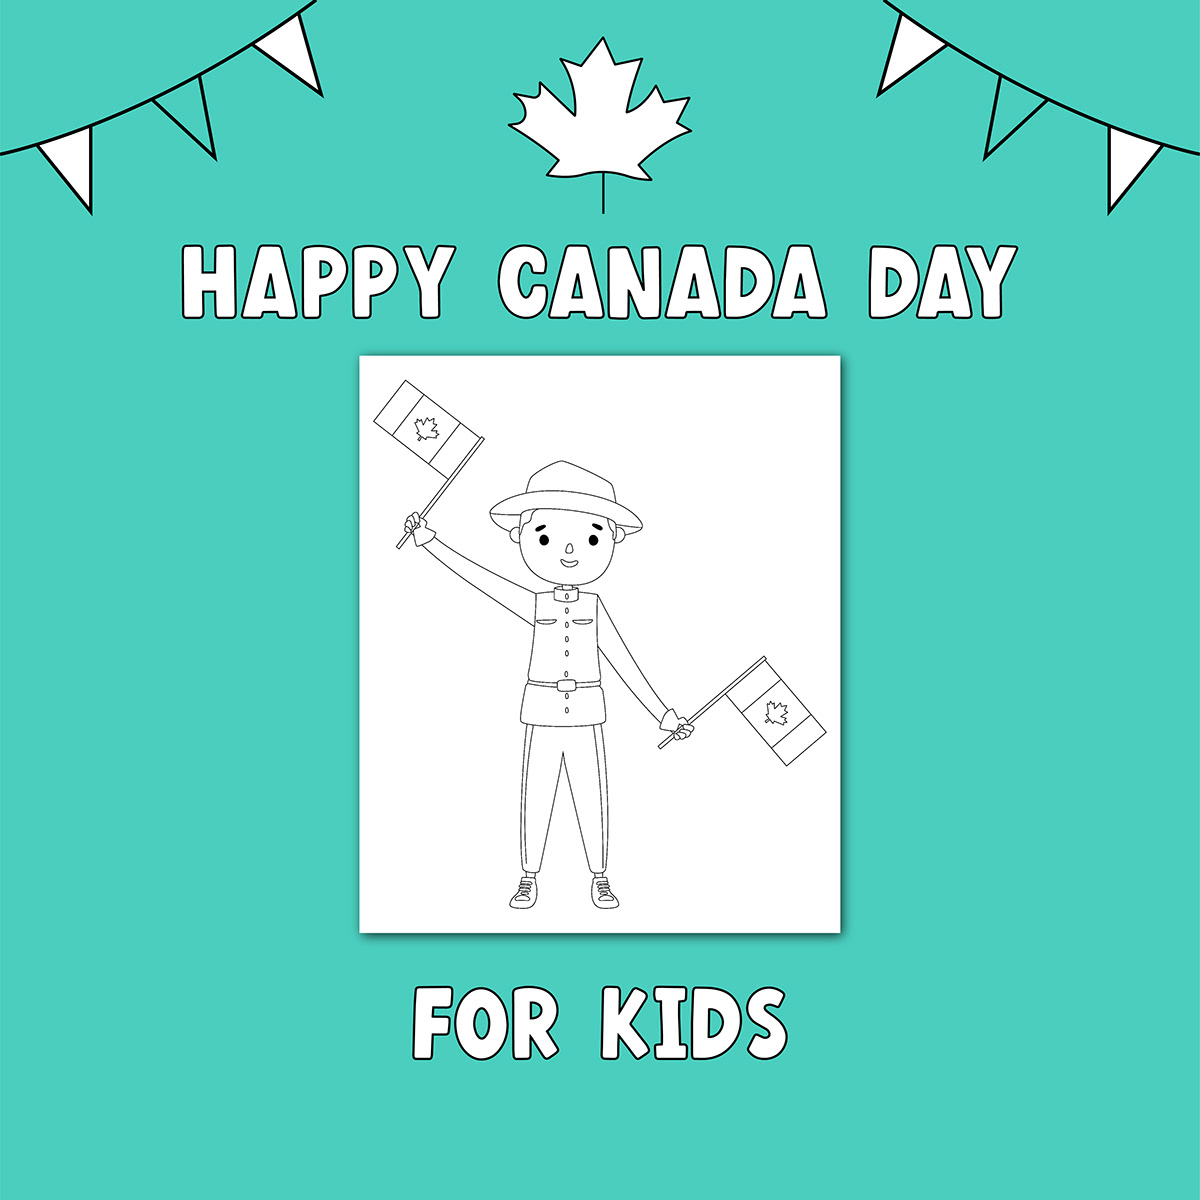 Happy Canada Day Coloring Pages For Children  

You Can Hire me in Behance  also Fiverr